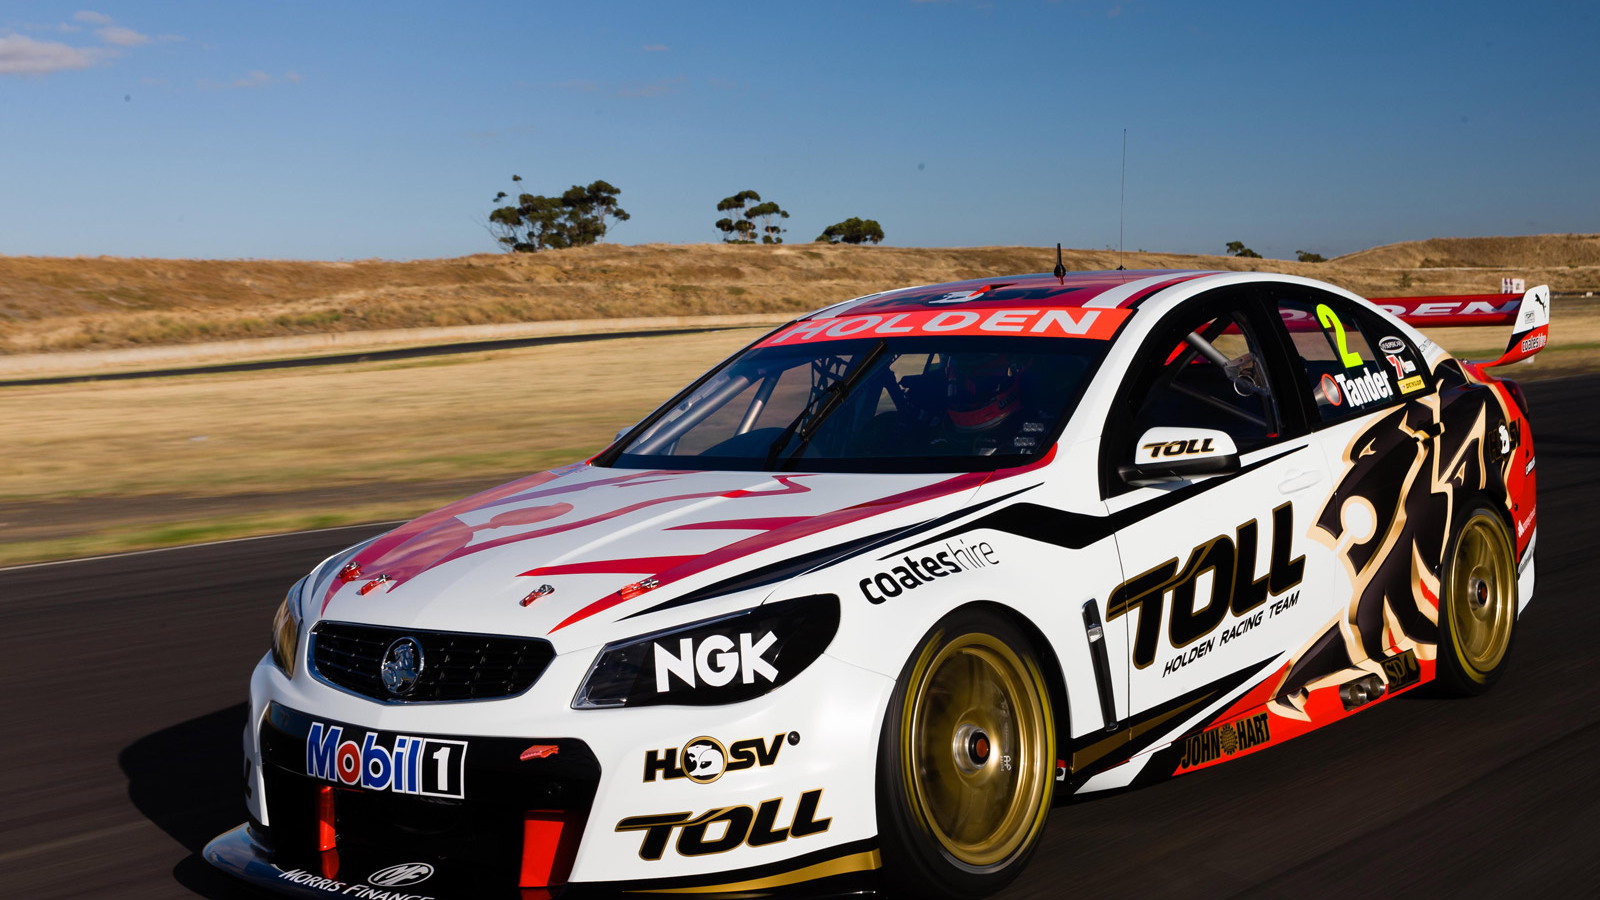 2013 Holden Commodore V8 Supercars race car